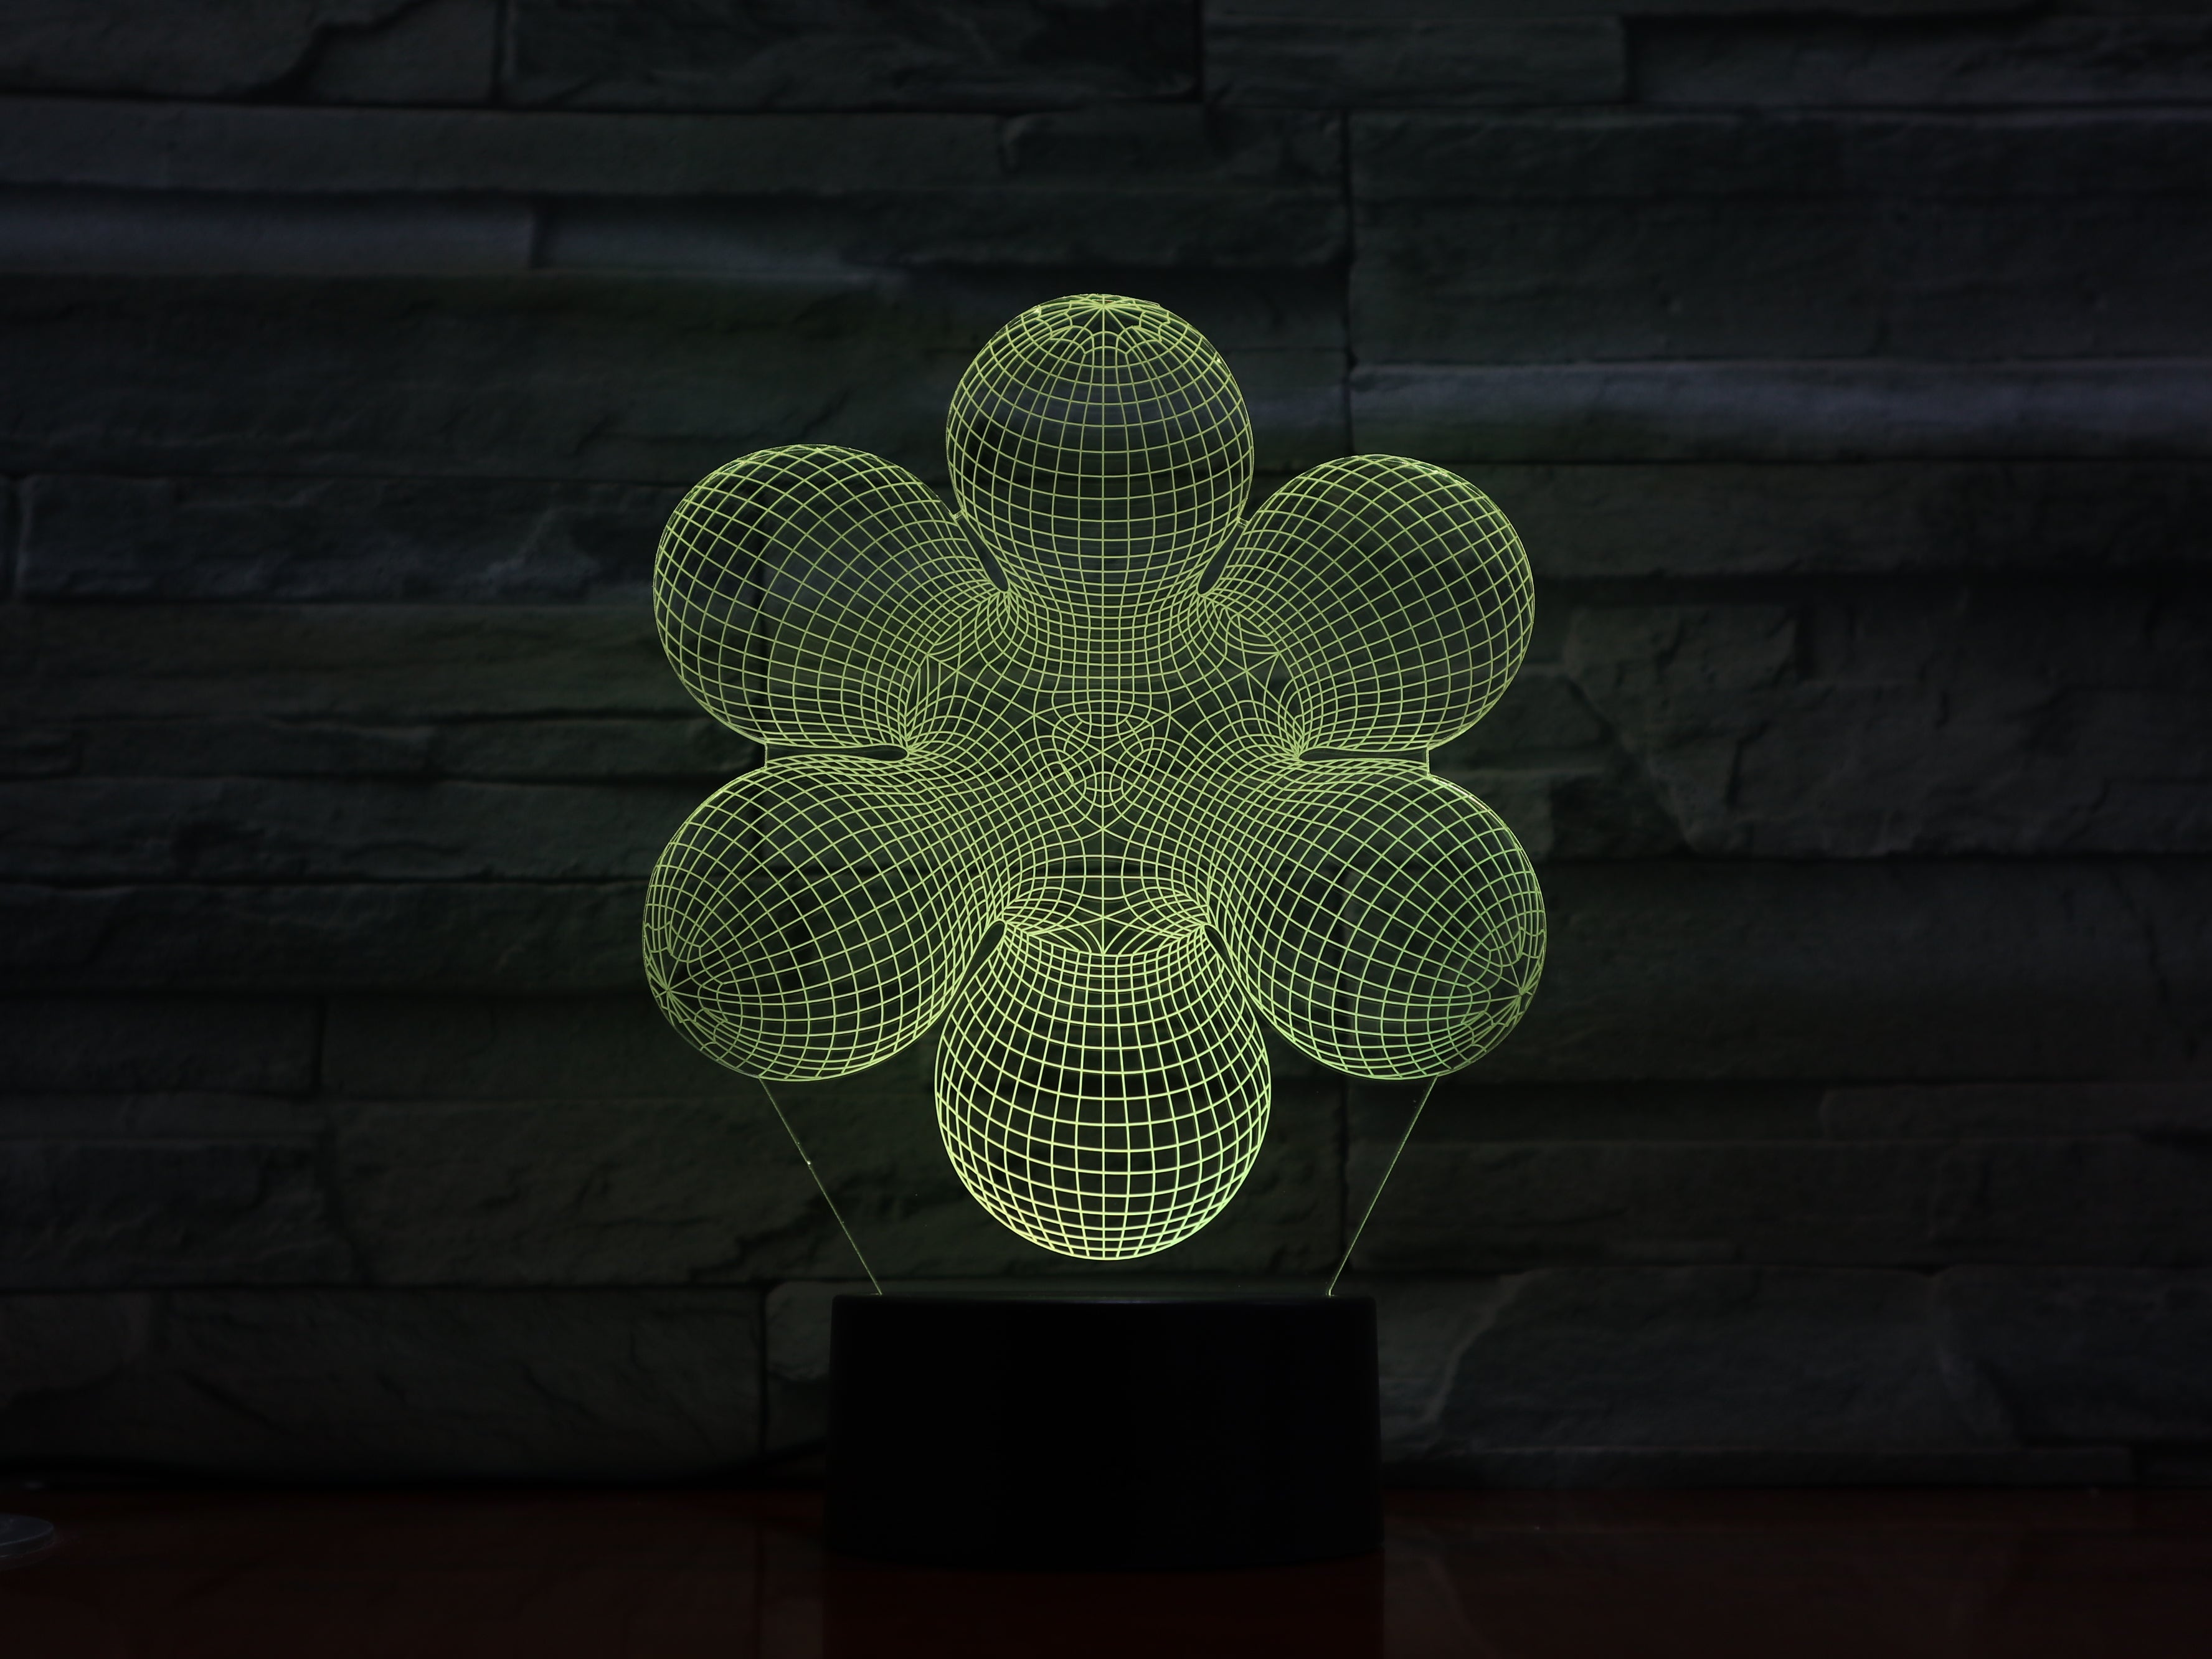 Abstract 3 - 3D Optical Illusion LED Lamp Hologram